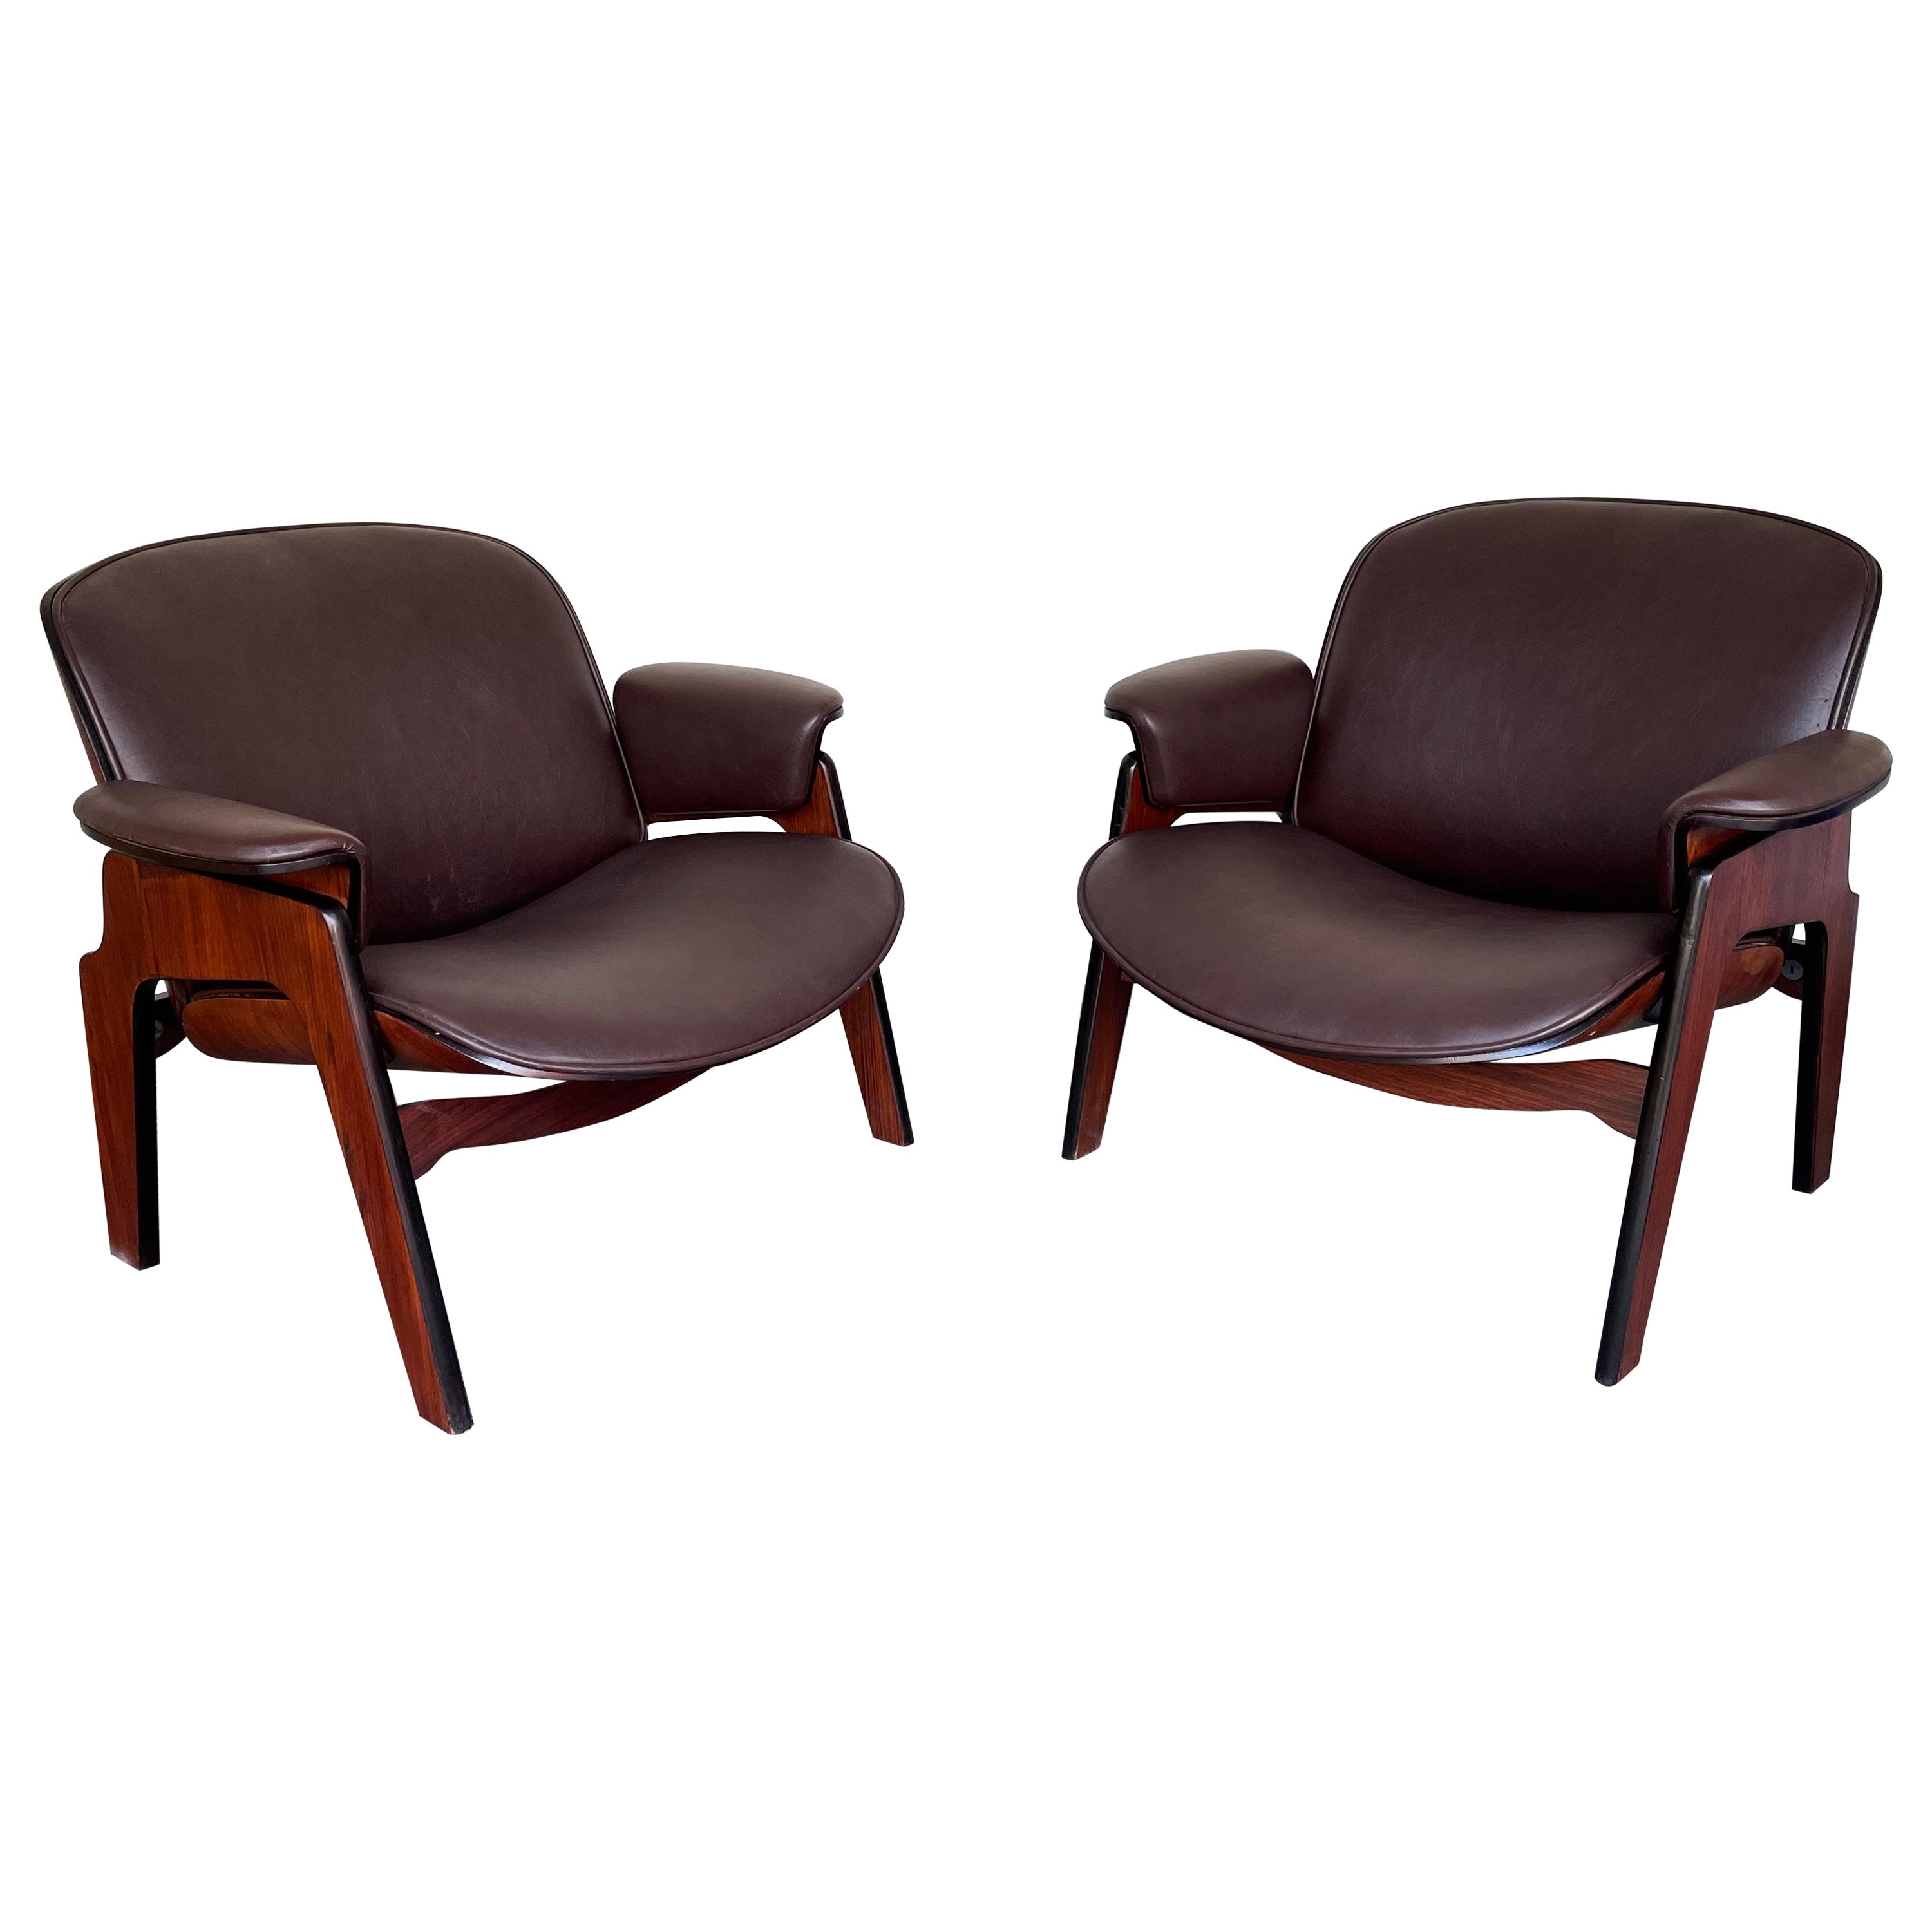 Pair of Wood Armchairs by Ico Parisi for MIM Roma, Italy, 1960s